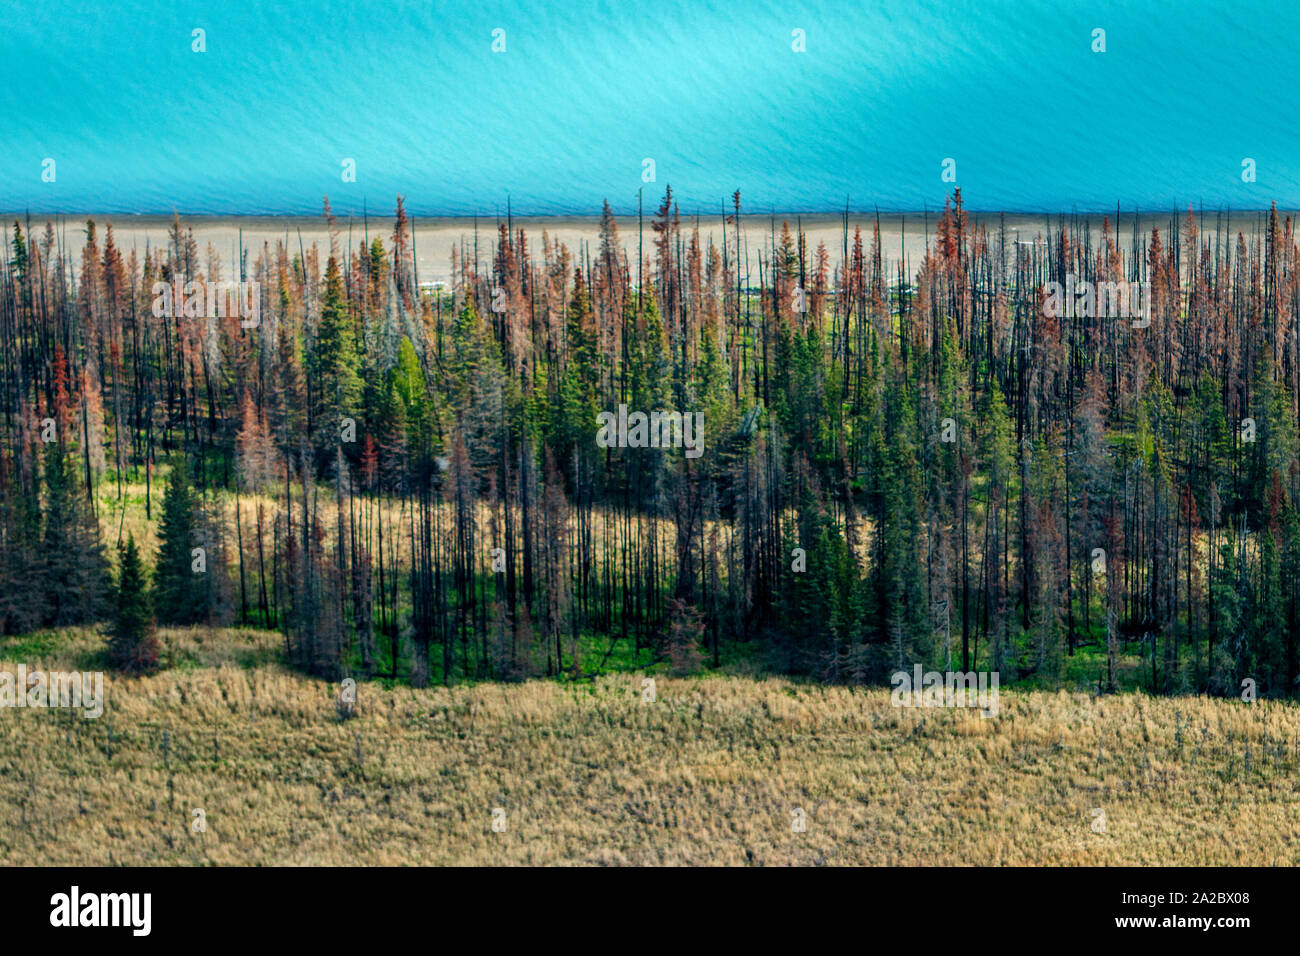 A patch of damaged forest near Anchorage in Alaska. The borealis forest – typically pine, birch and larch - make up about thirty percent of all forest in the world. Less efficient than rain forests, it’s still a vital part of the carbon sink. The mean temperature in the arctic areas are already 1.5c warmer than normal. Higher levels of CO2 accelerate growth of the forest. However; as growth is accellerated, the lifespan of the trees is shortened. The net result is a CO2 saturated forest that turn from being a carbon sink to emitter. Stock Photo